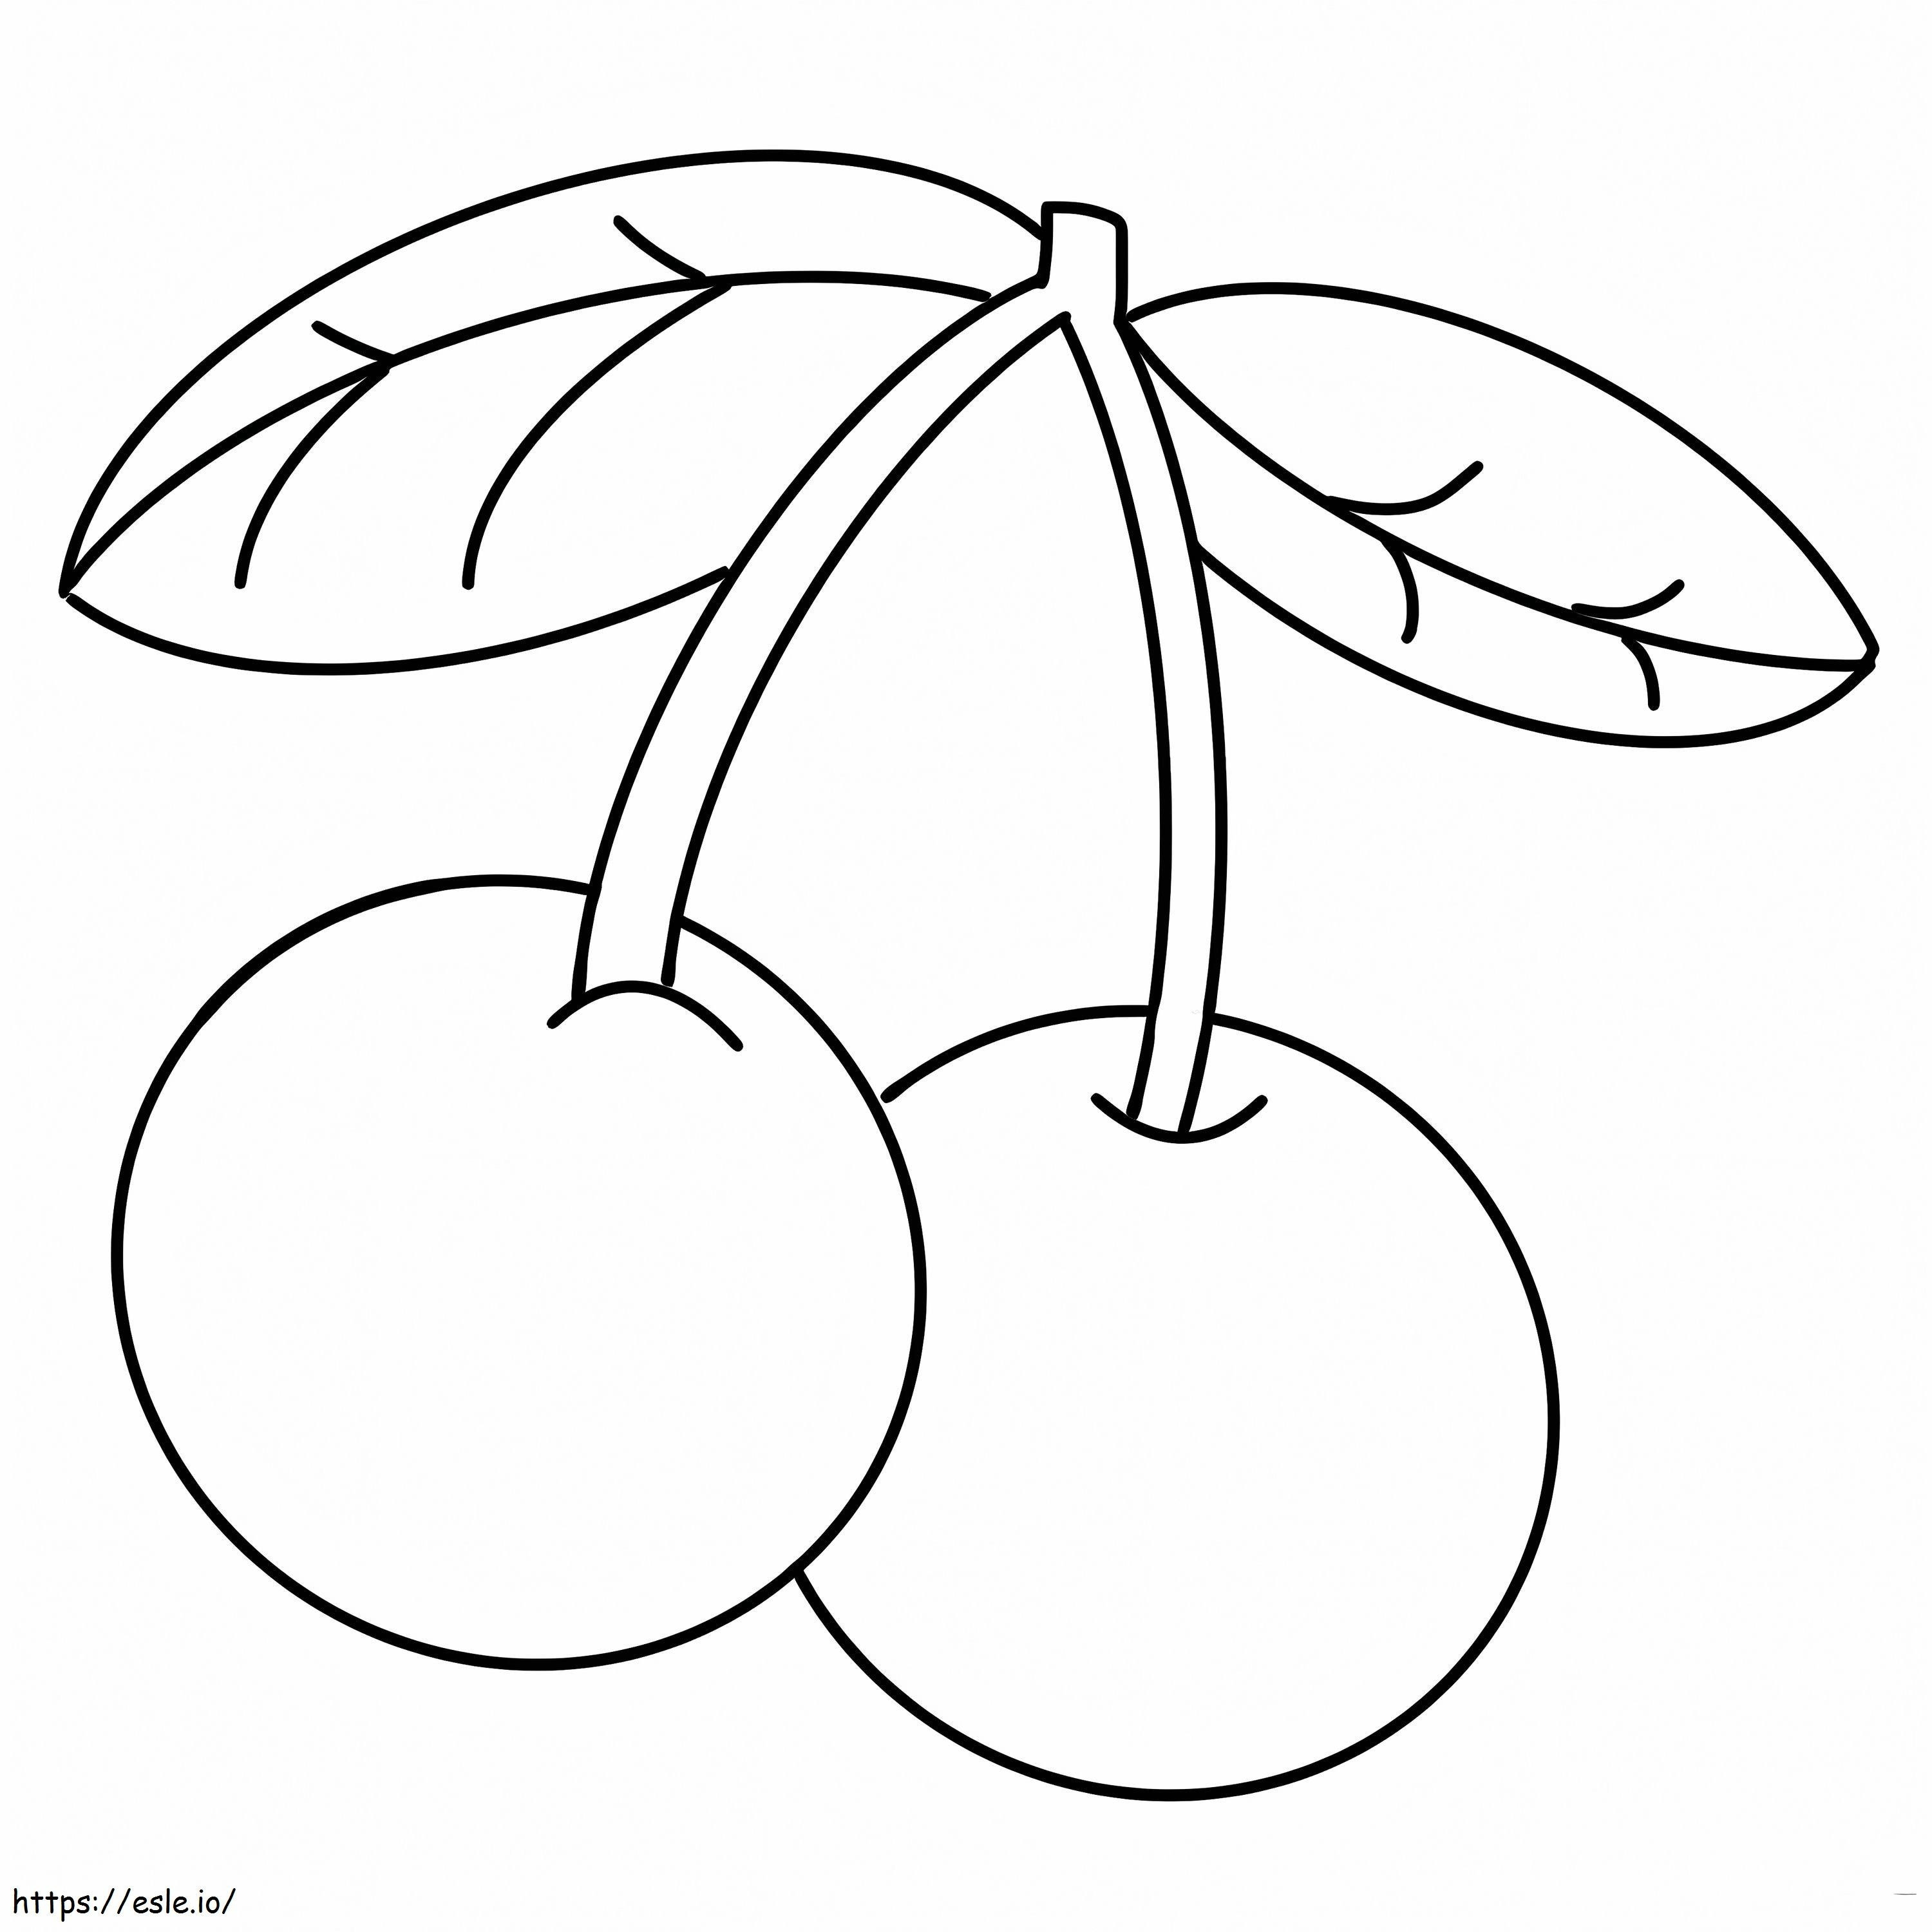 Simple Cherry Two coloring page